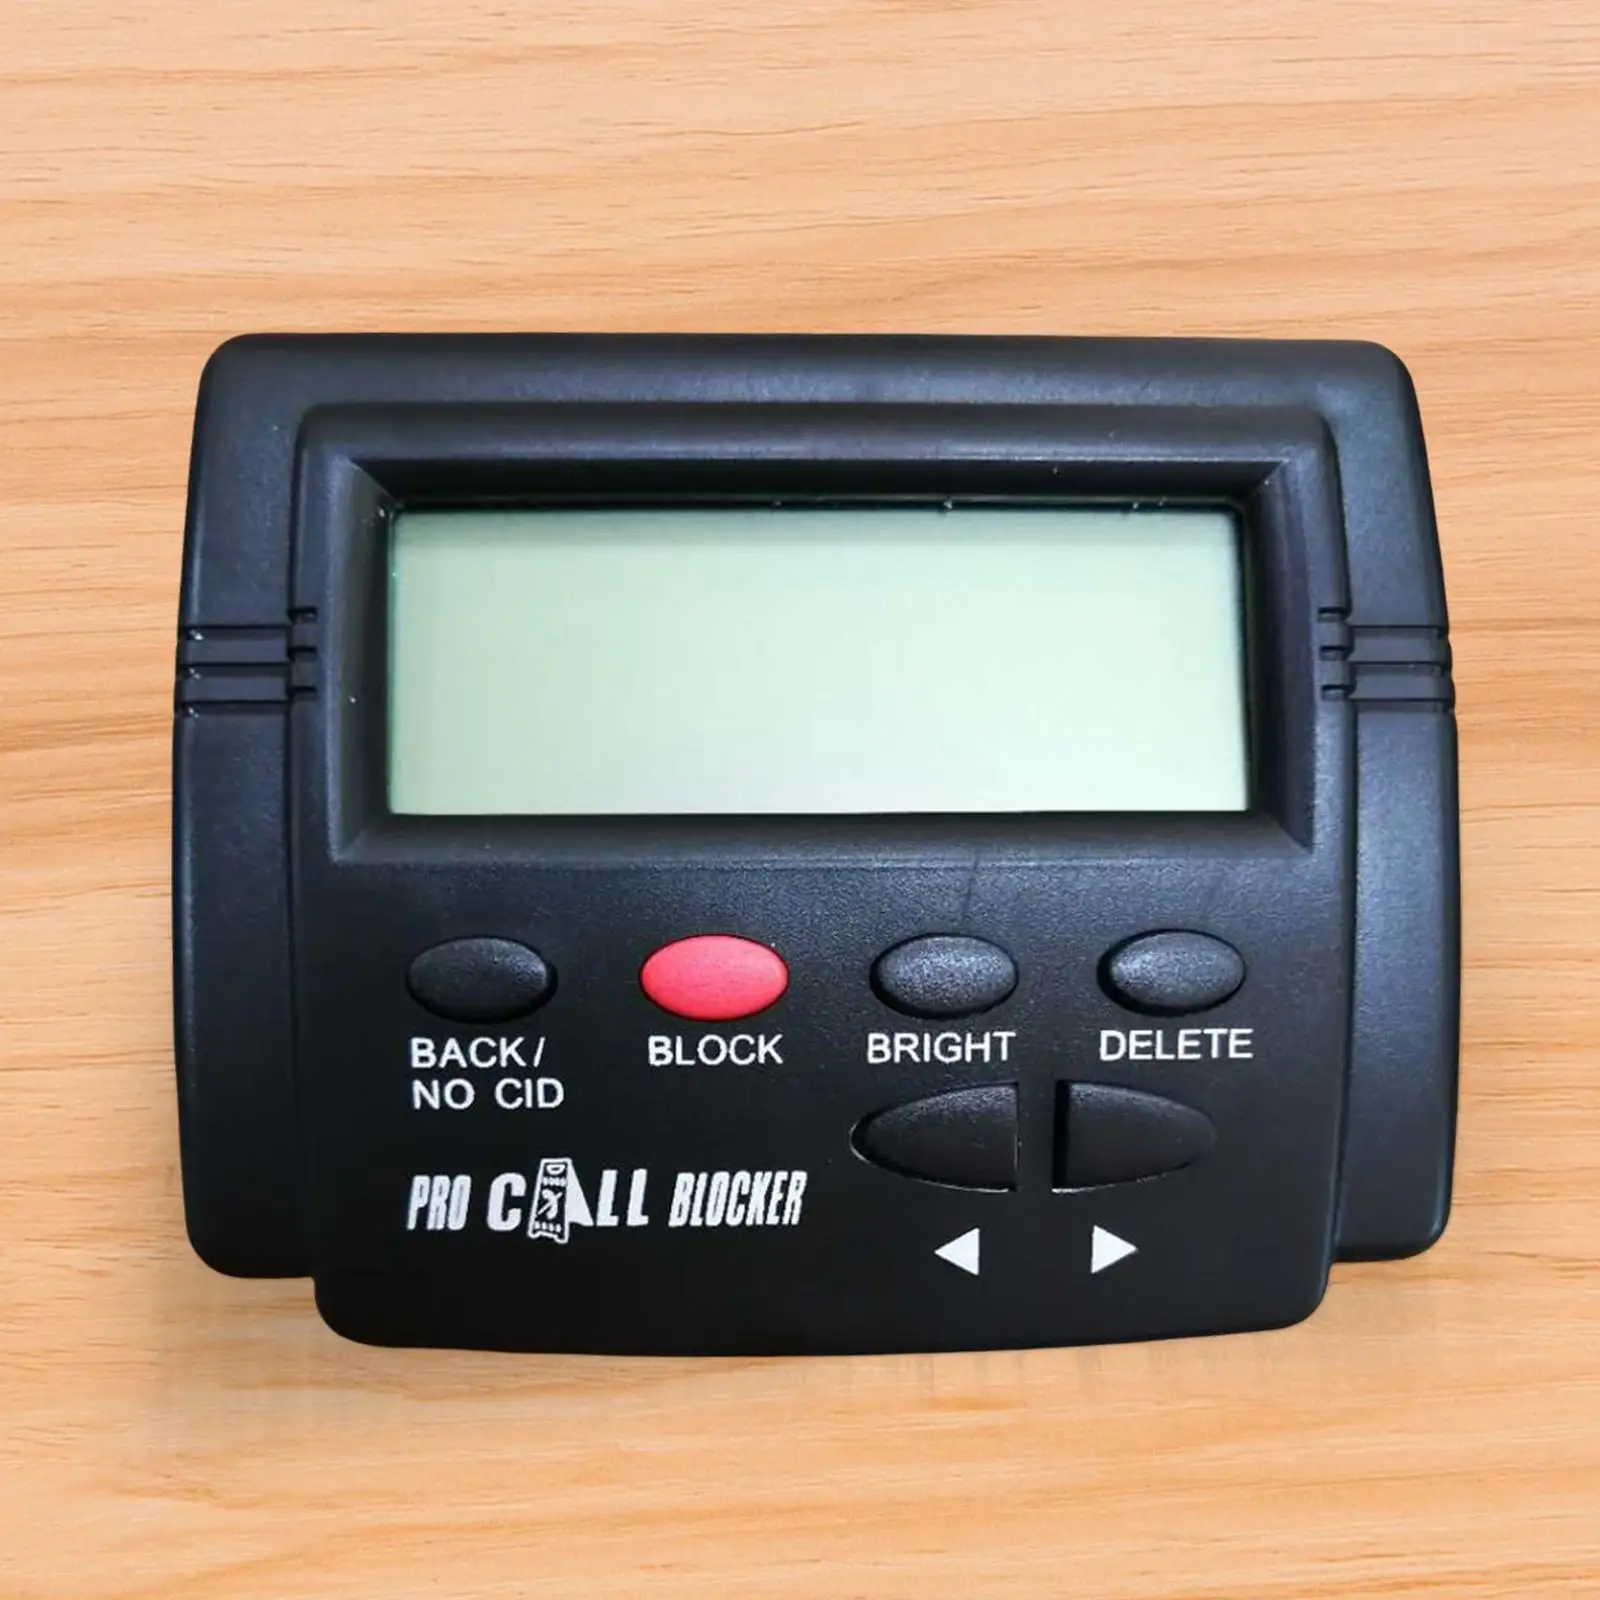 Call  LCD Display for 1500 Unwanted Calls, Robocalls, Incoming Calls and Nuisance Calls by Pressing 